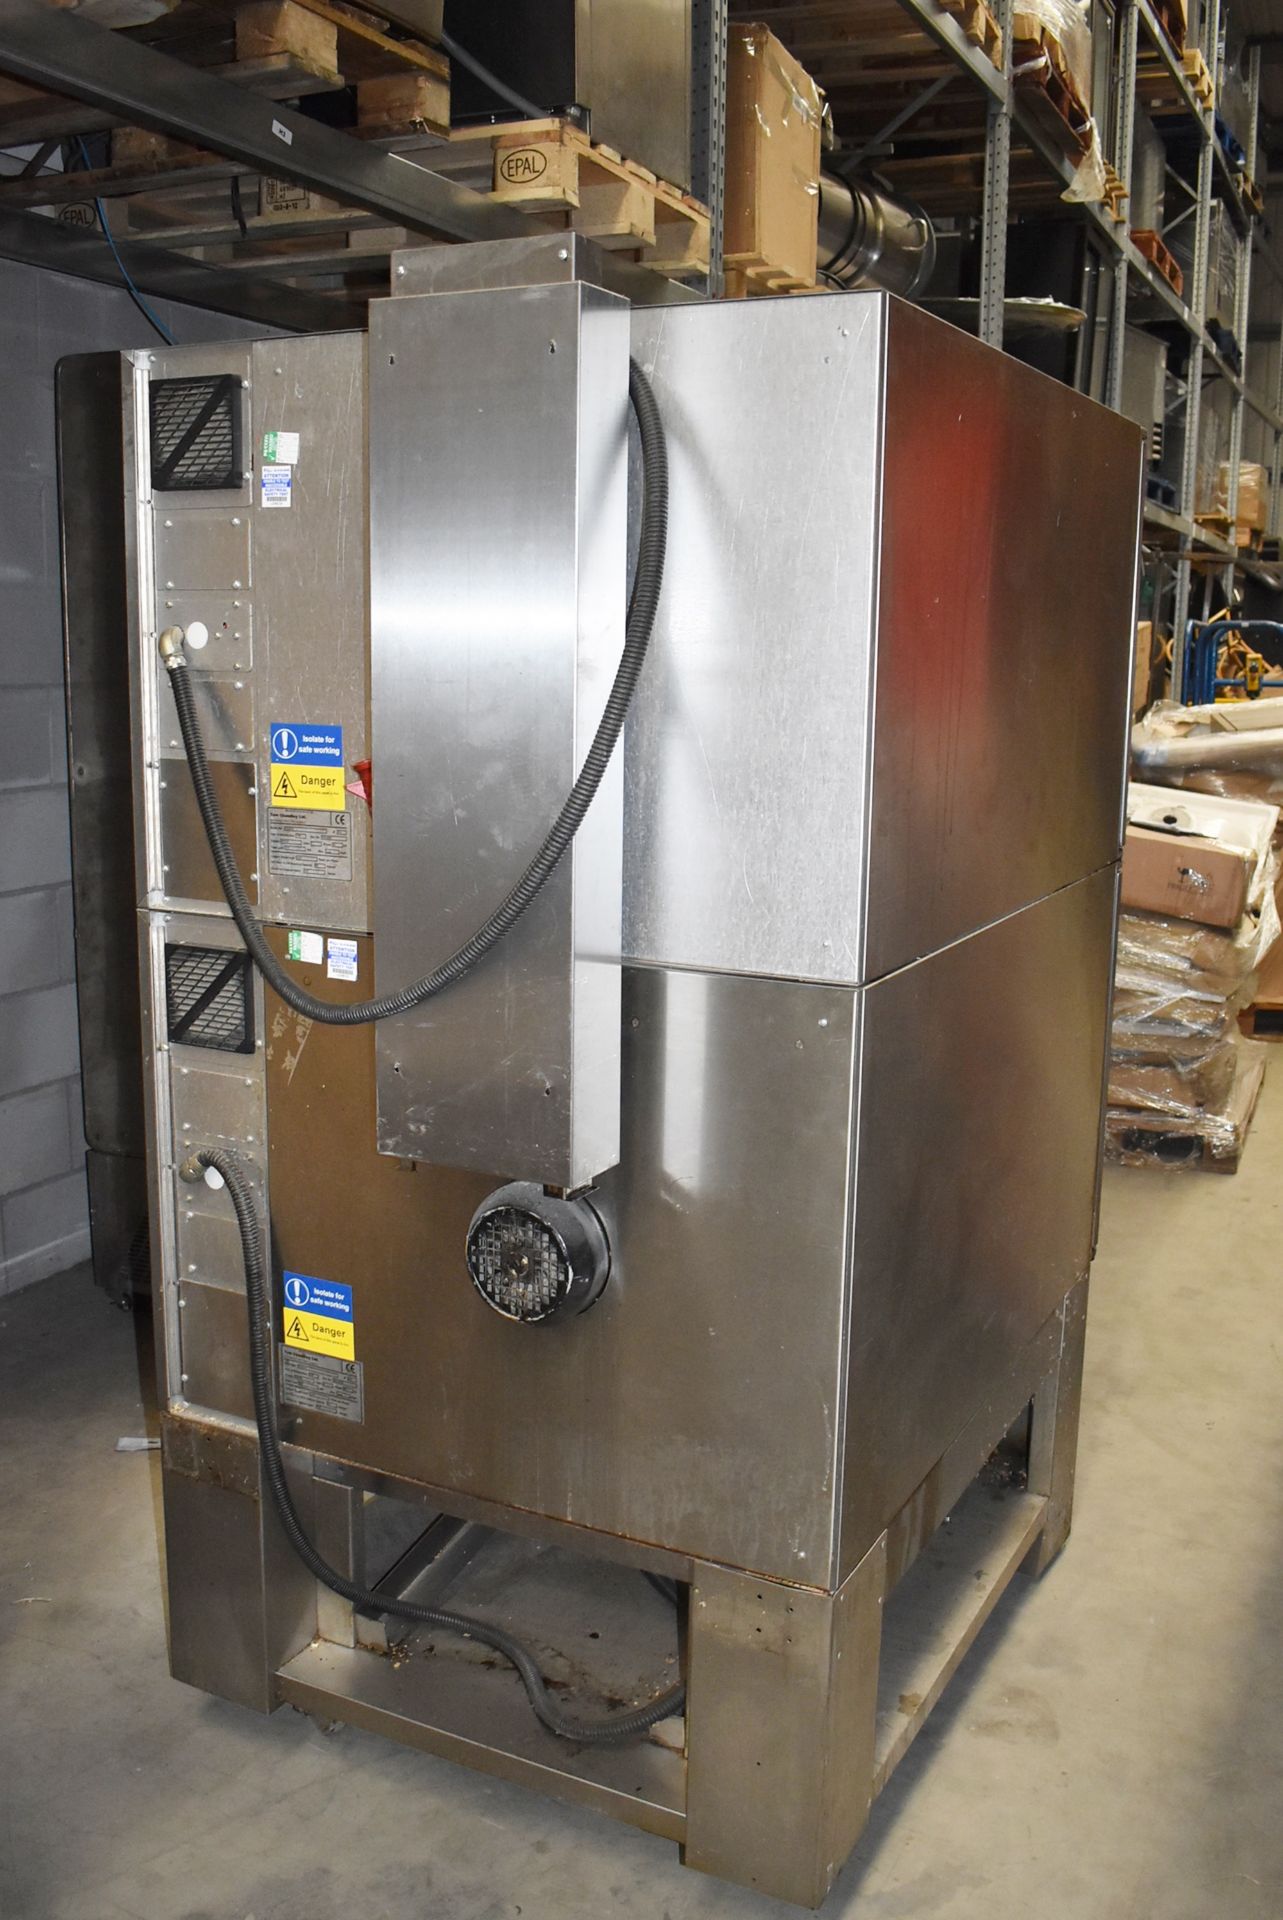 1 x Tom Chandley Double Door Bakey Oven - 3 Phase - Model TC53018 - Removed From Well Known - Image 7 of 8